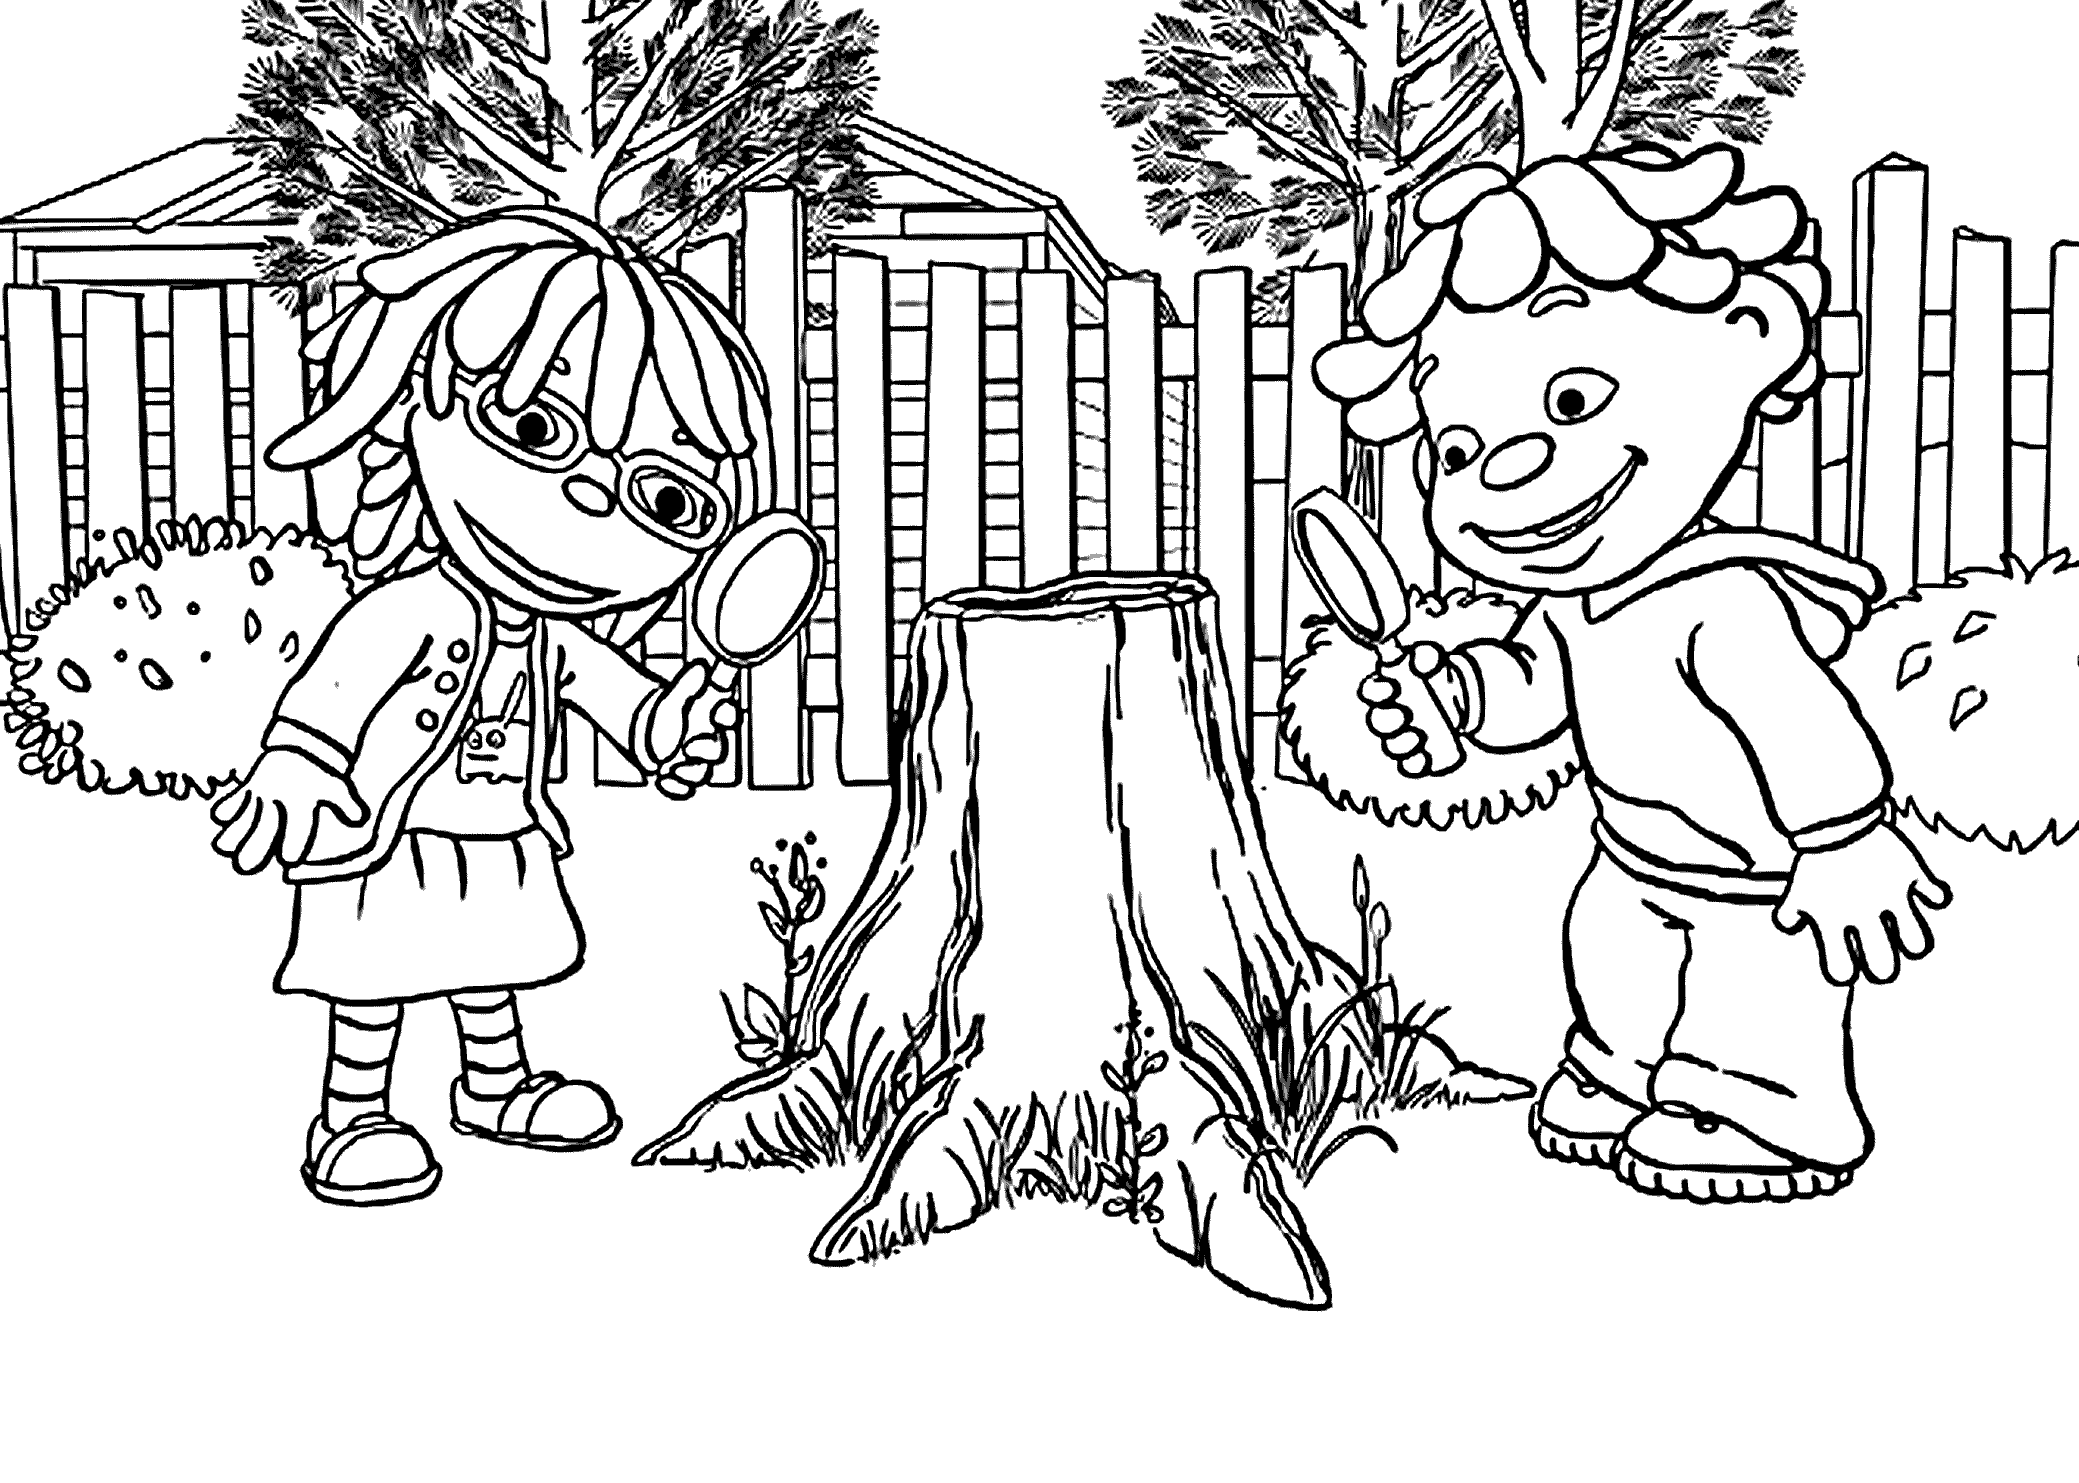 Sid The Science Kid Coloring Pages Free - High Quality Coloring Pages